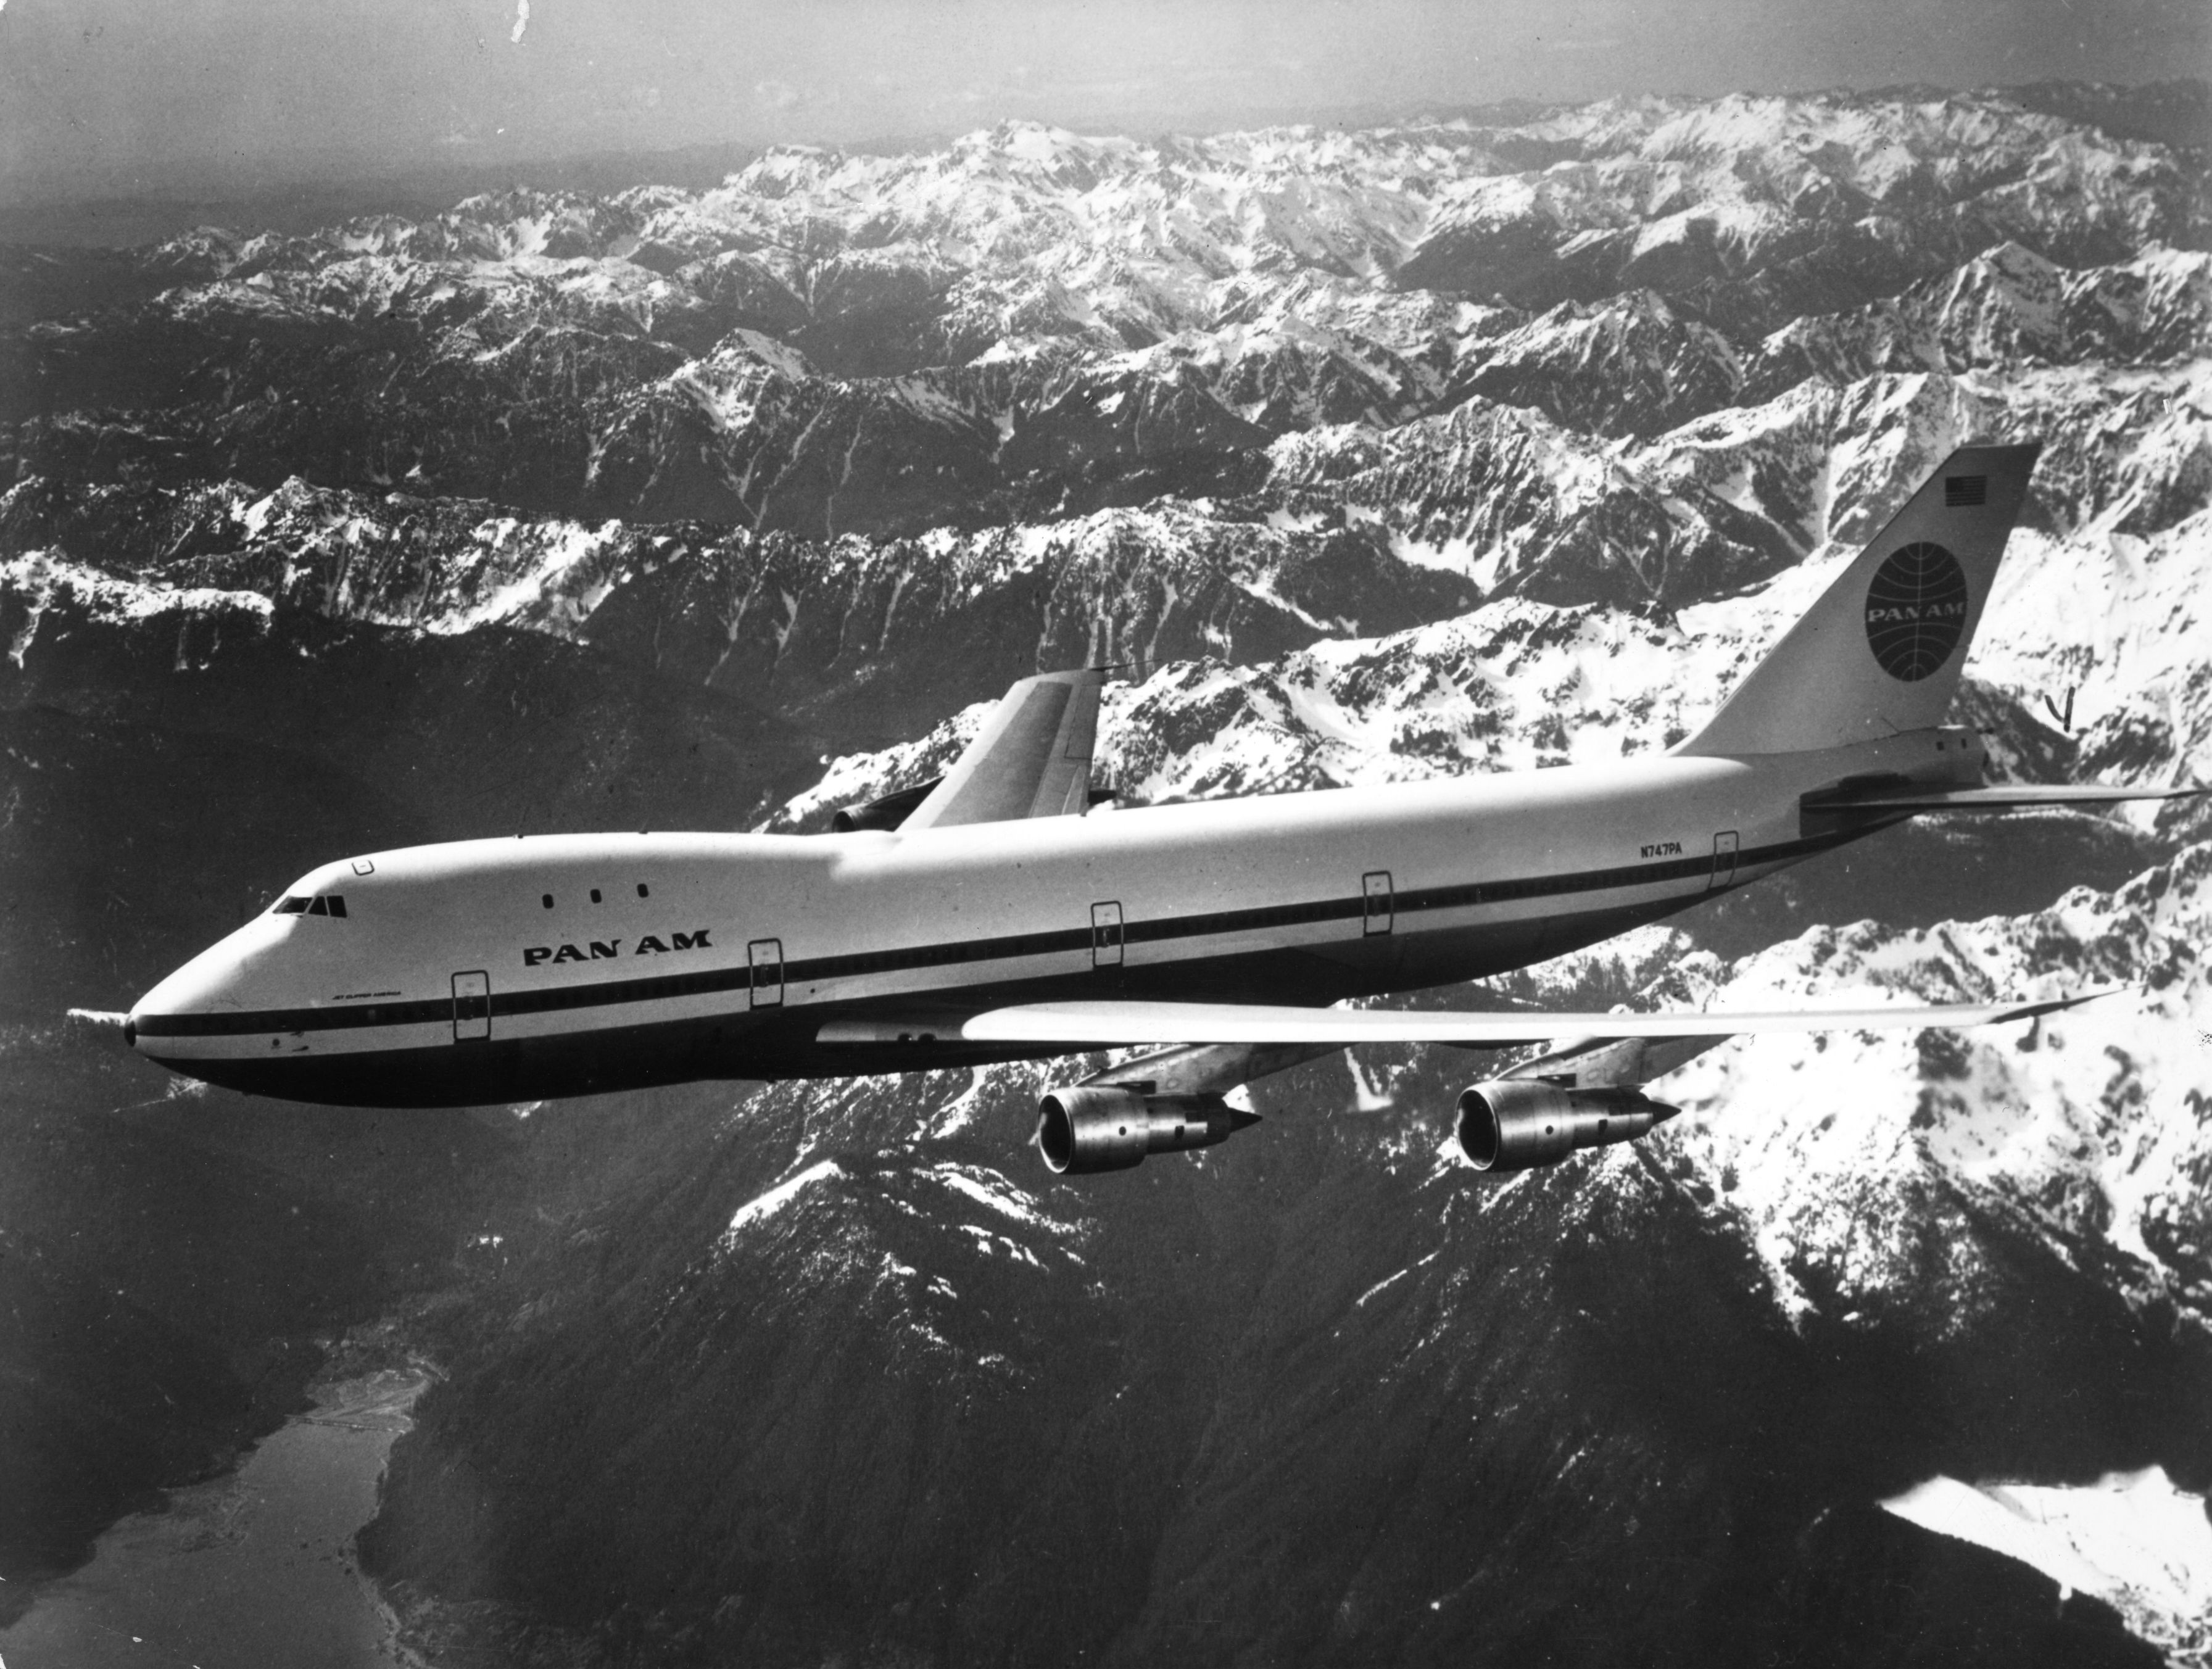 A Pan Am boeing 747 flying over snow covered mountains. Image: Keystone / Getty Images